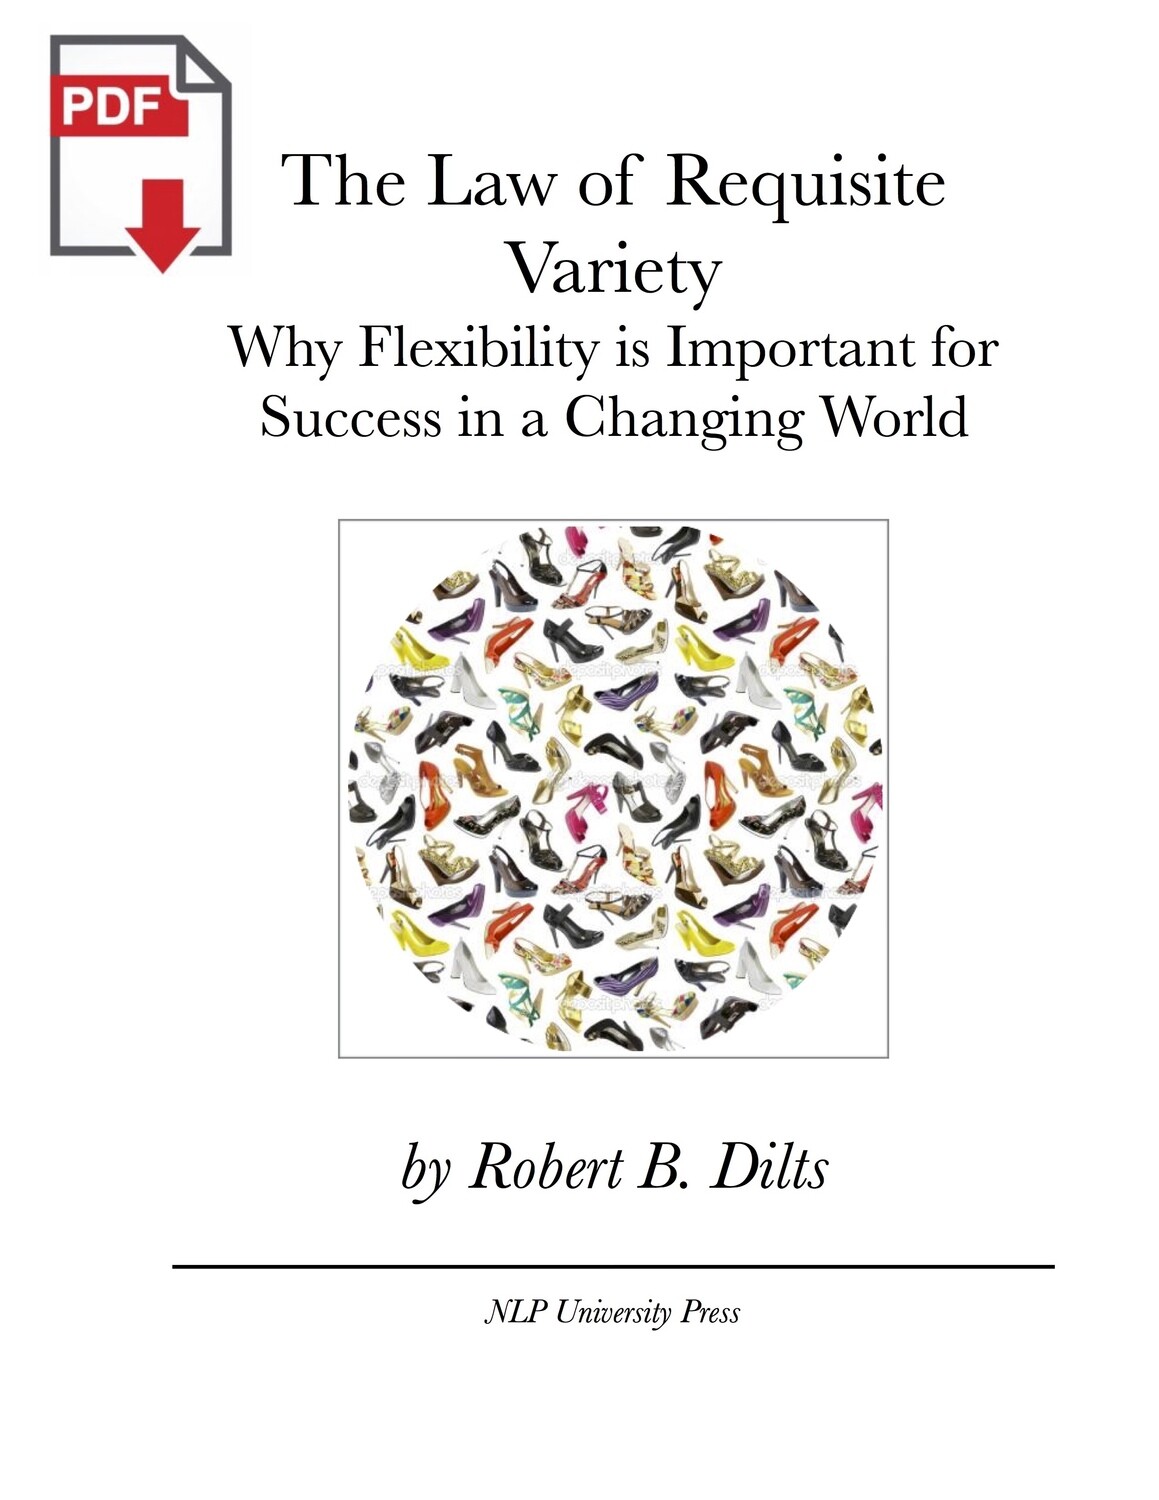 The Law of Requisite Variety: Why Flexibility is Important for Success in a Changing World [PDF]